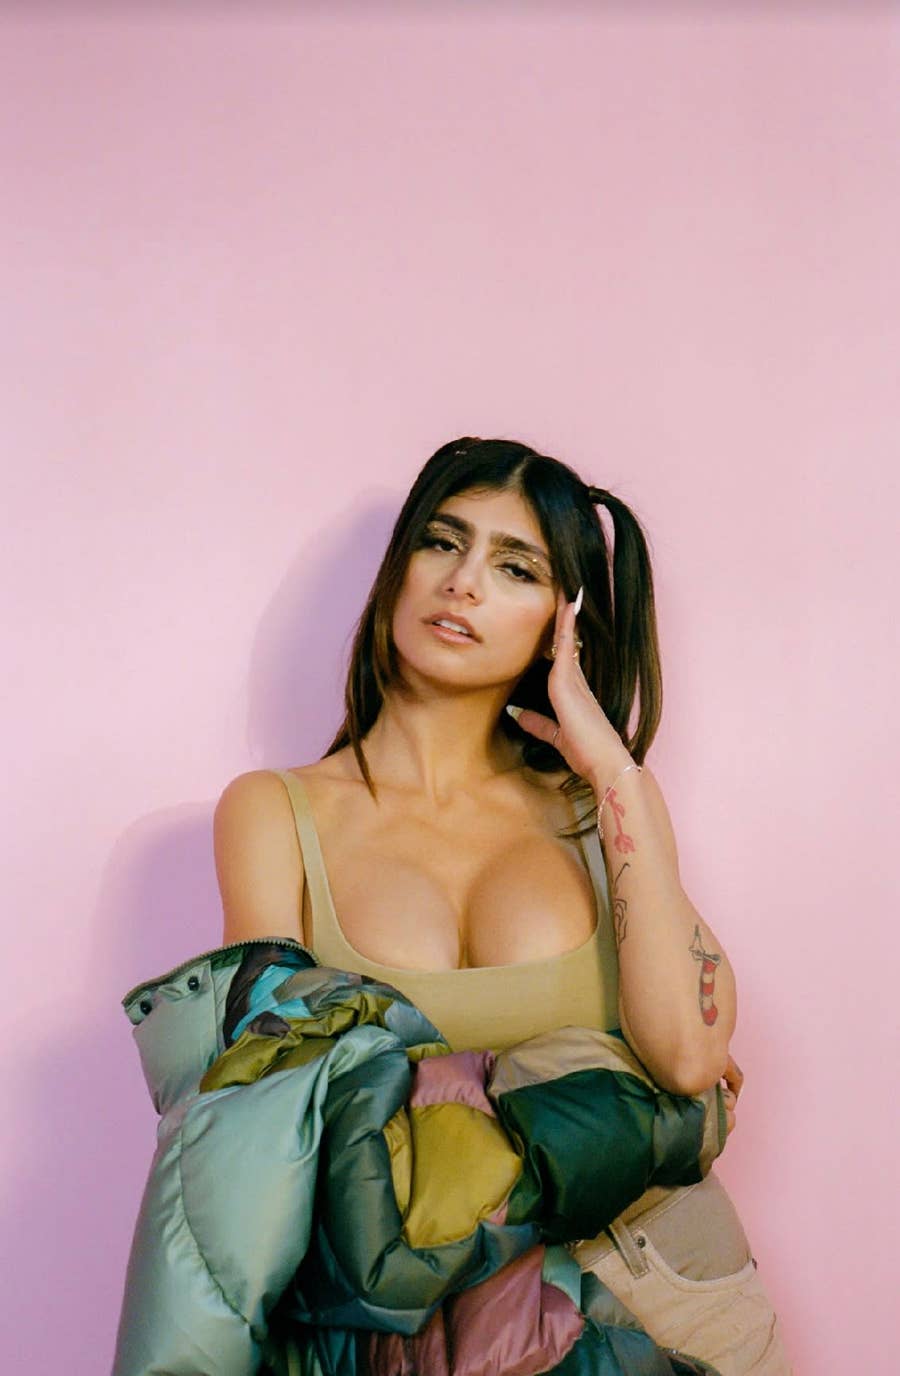 Mia Khalifa and Slawn Star in New Collab Campaign From Outlander Magazine  and PLACES+FACES